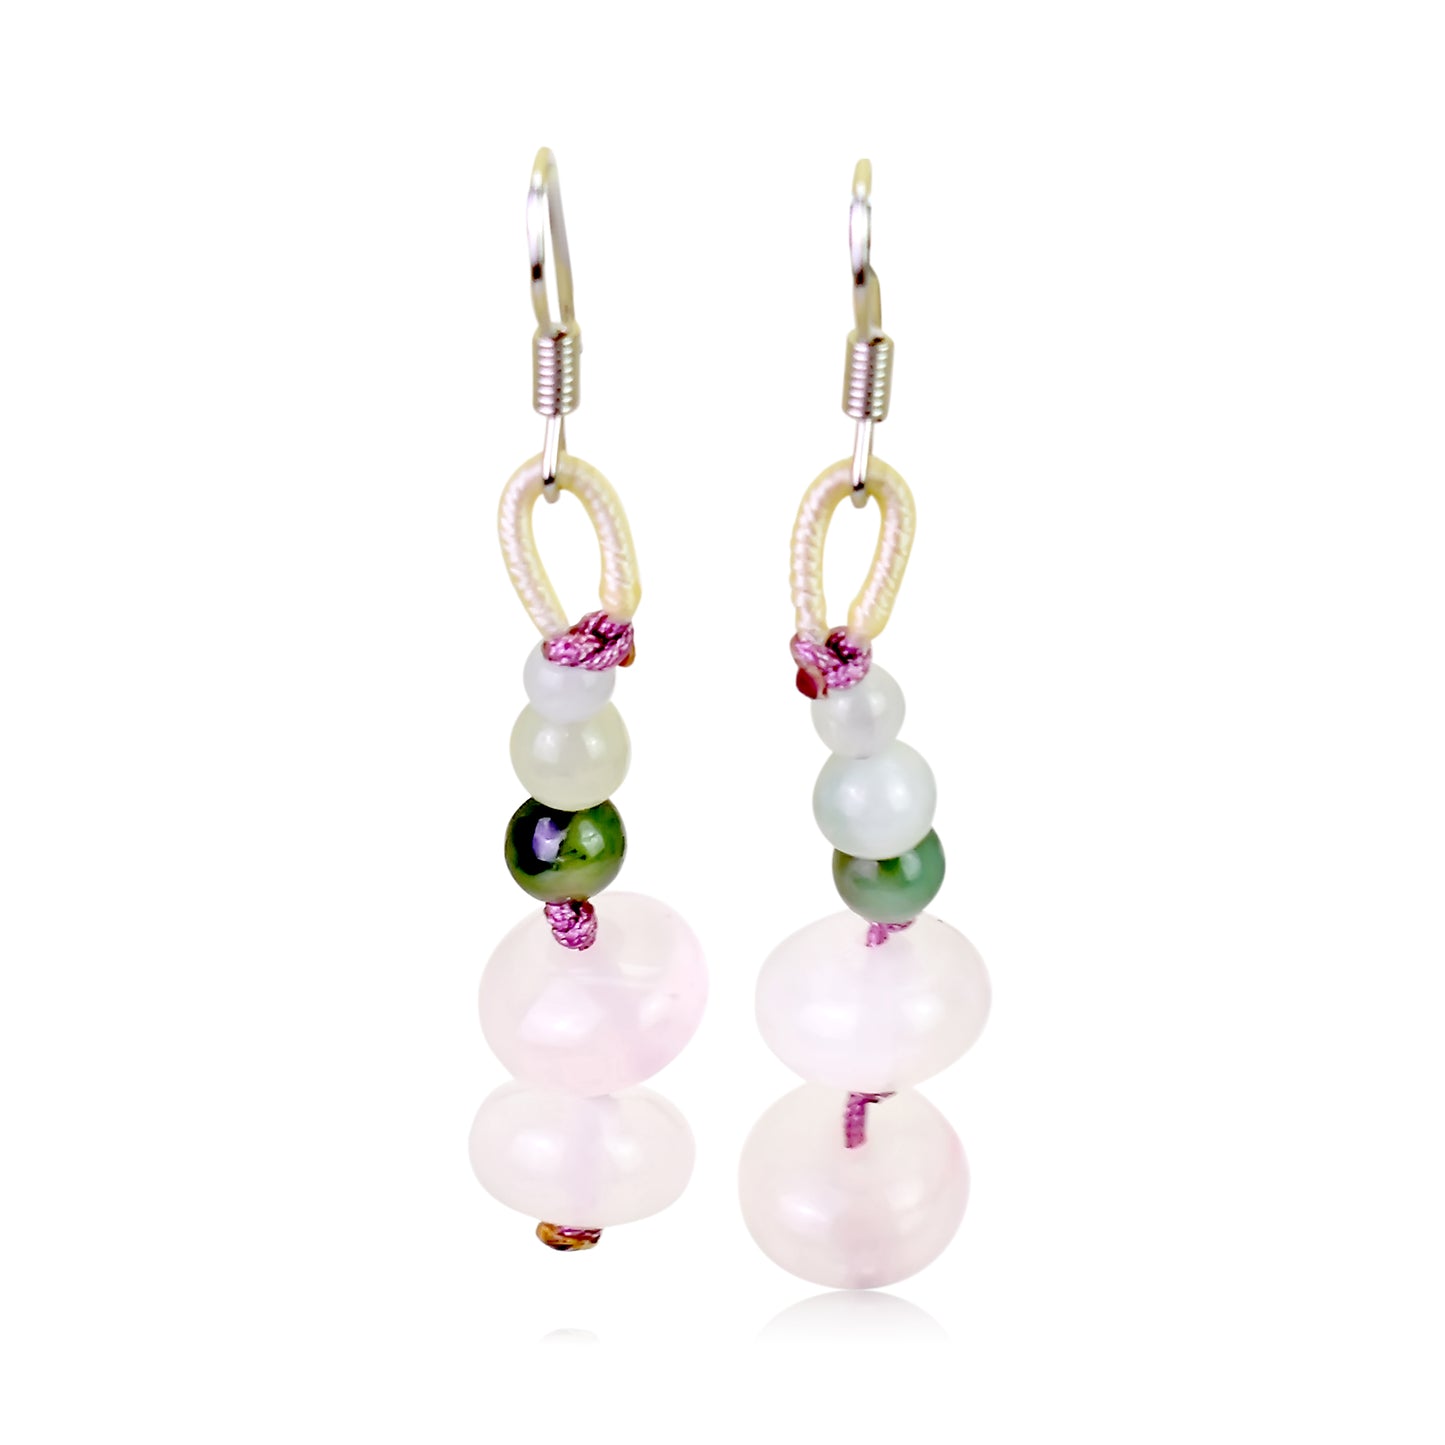 Look Absolutely Stunning with Glamorous Spherical Rose Quartz Earrings made with Lavender Cord